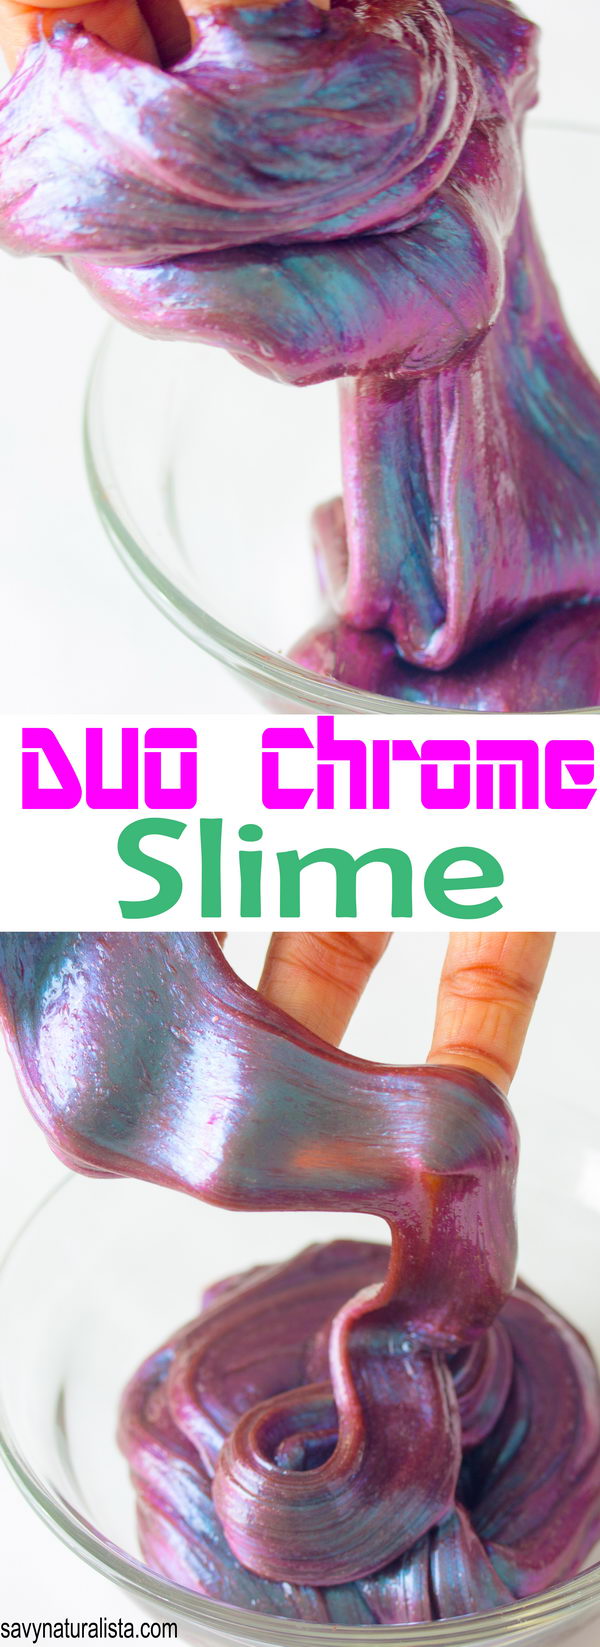 Duo Chrome Slime With Wonderful Colors Shifting From Purple To A Lovely Green Or Blue. 